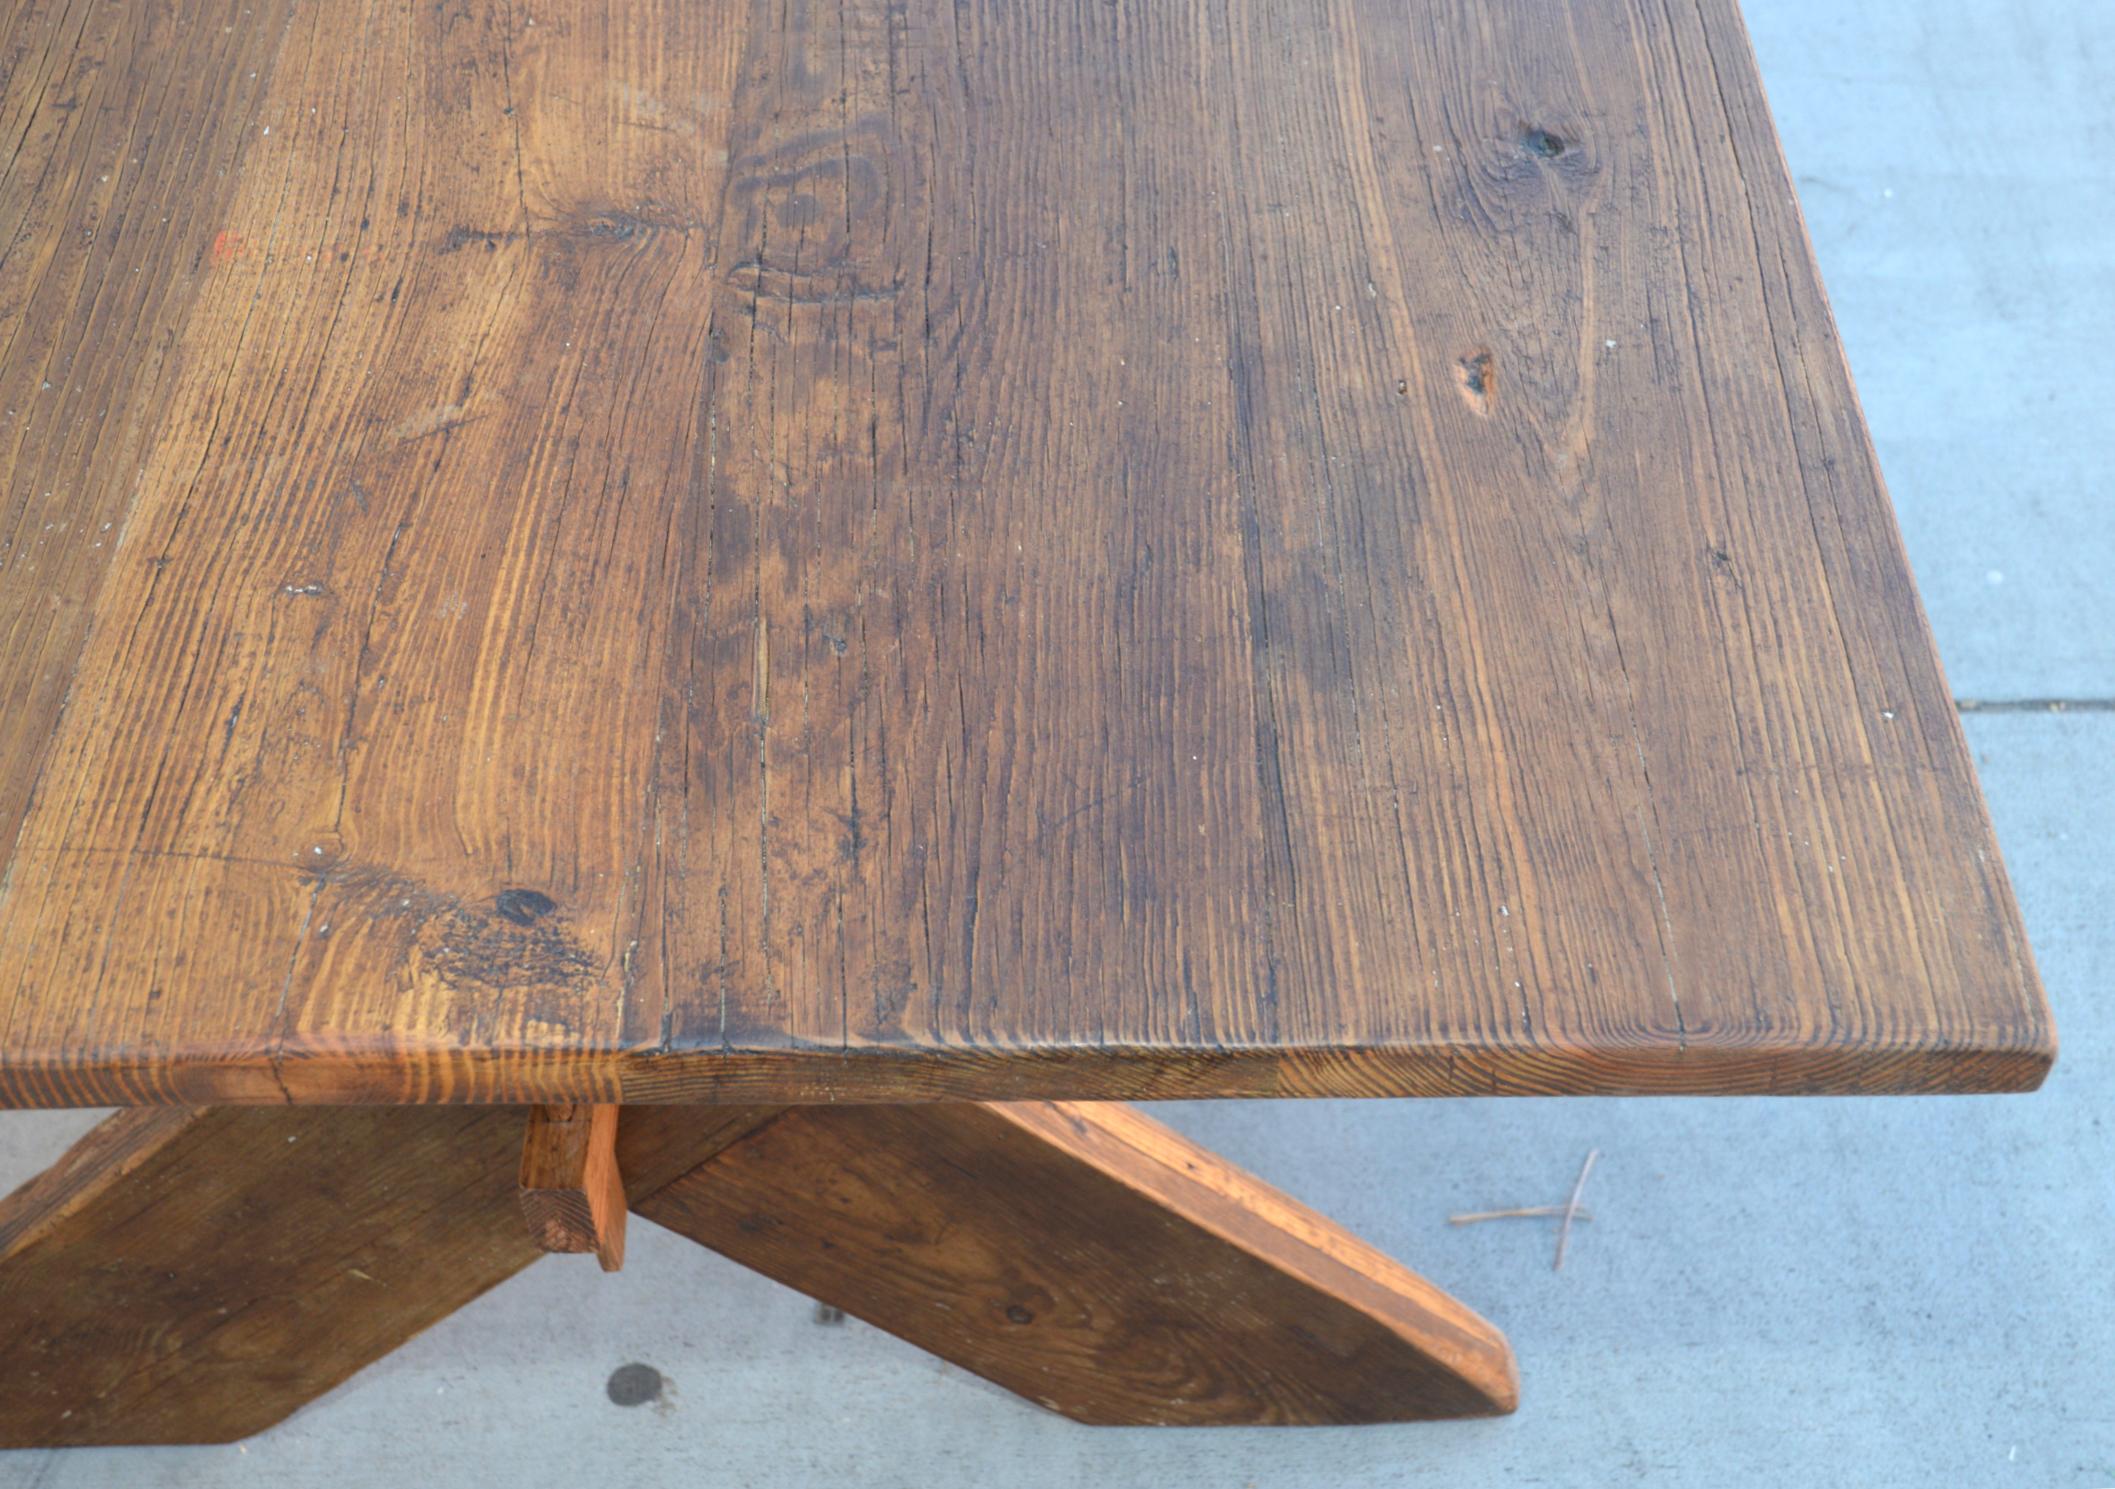 Hand-Crafted Custom X-Trestle Table in Reclaimed Heart Pine For Sale